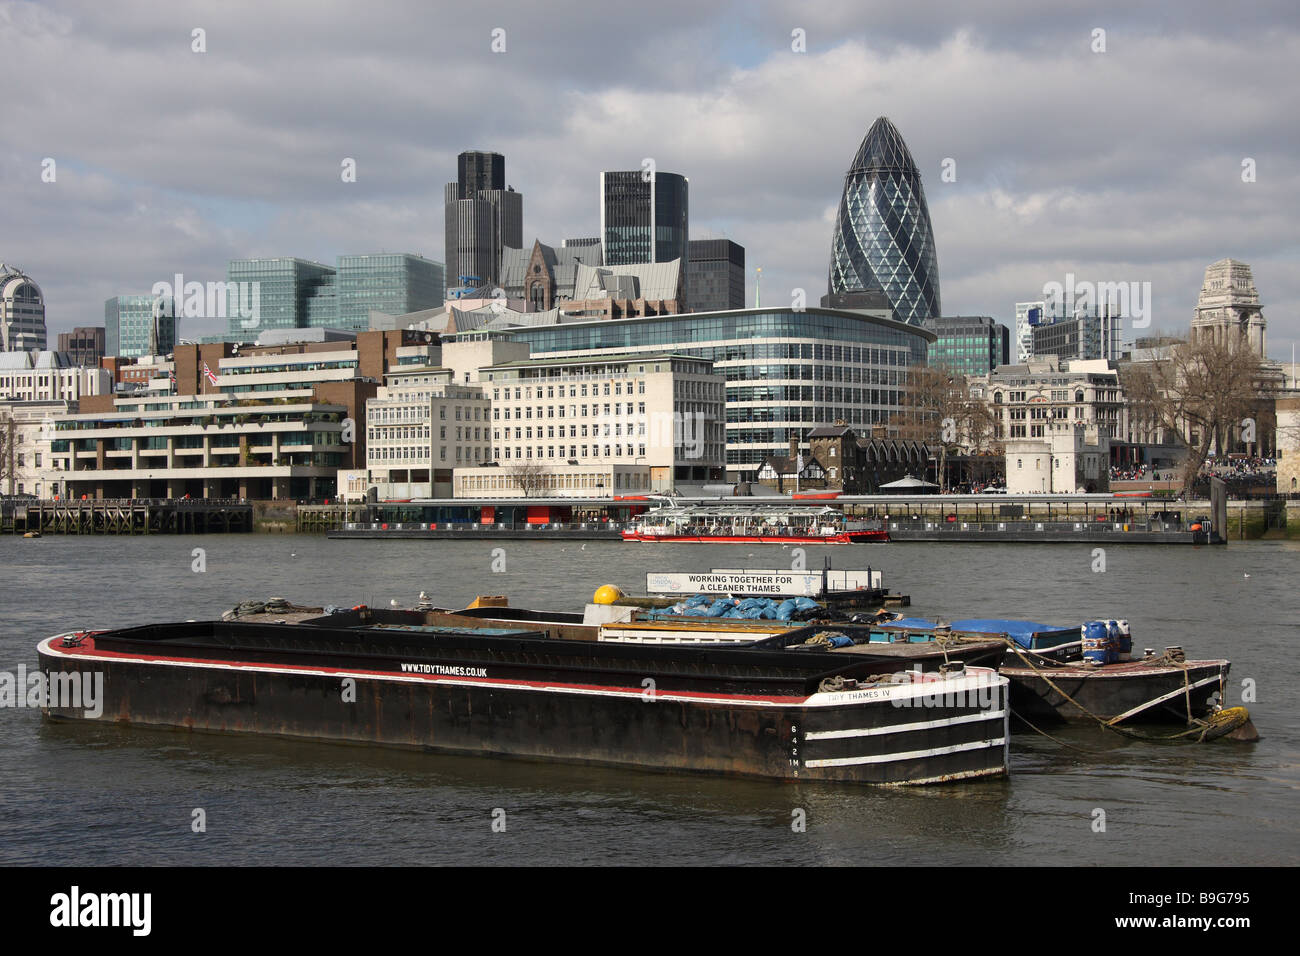 london england uk barge gherkin natwest tower modern glass clad offices architecture river thames Stock Photo